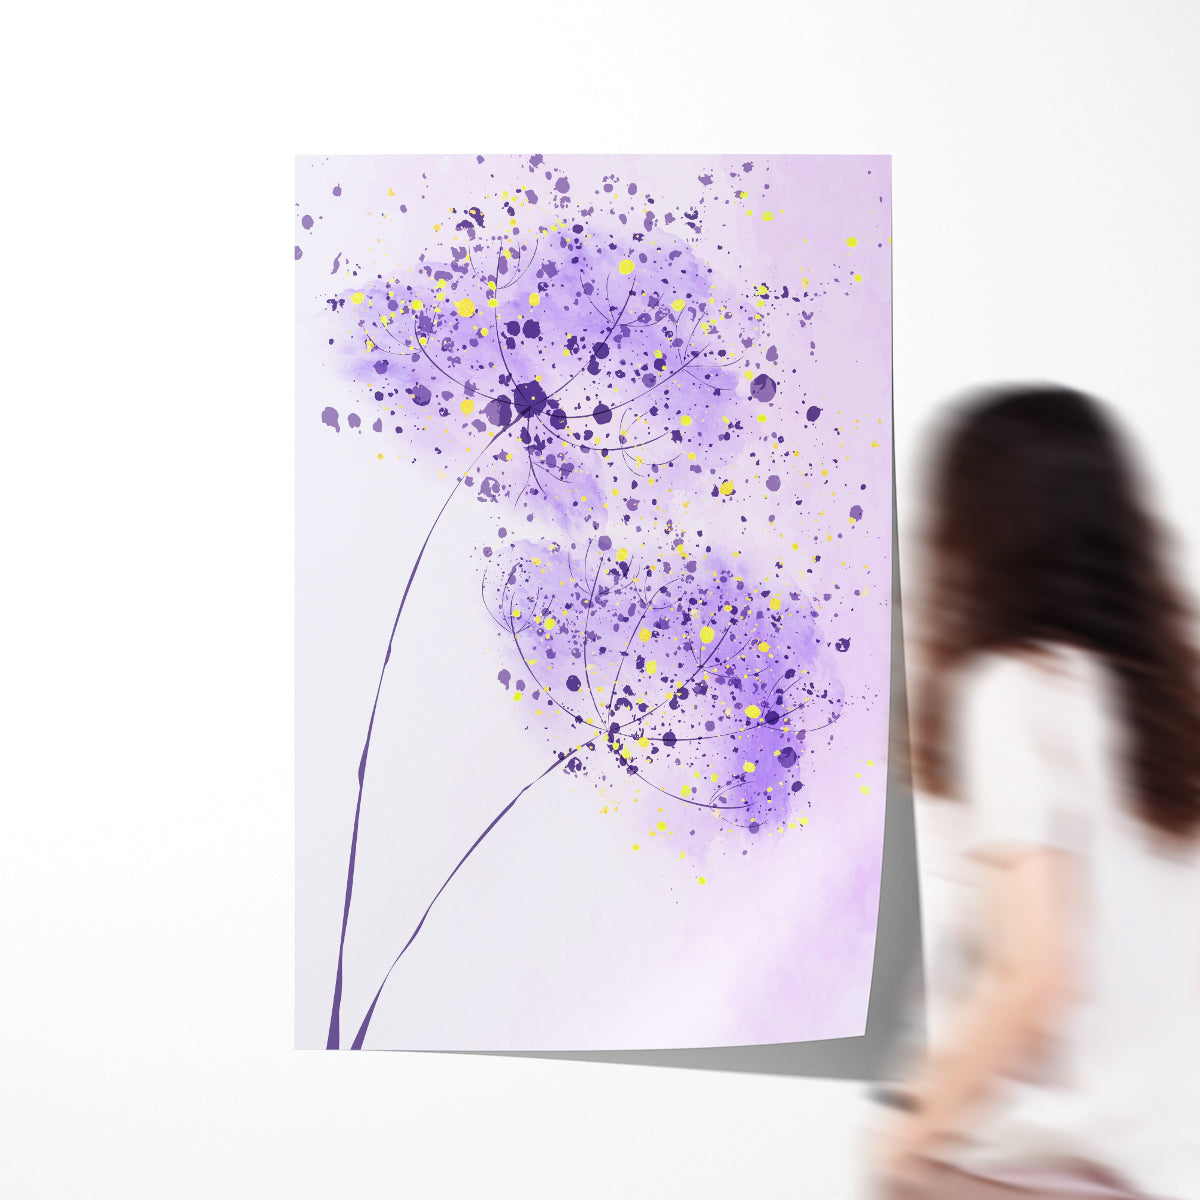 Purple Dandelion Abstract Minimalist Posters And Wall Art Prints For Living Room-Vertical Posters NOT FRAMED-CetArt-8″x10″ inches-CetArt